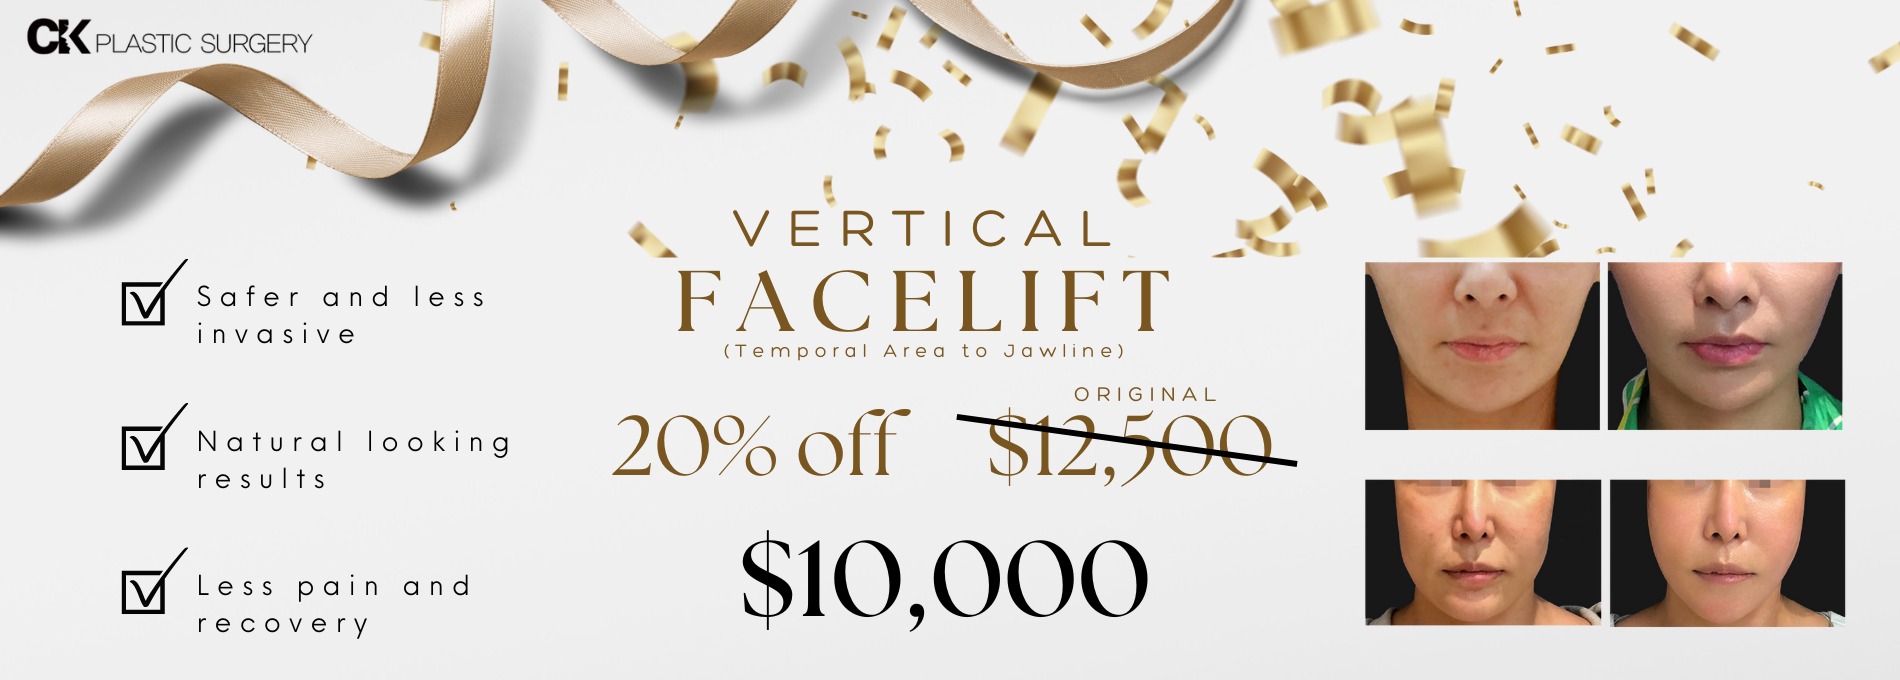 Vertical Facelift (11 × 17 in) (1900 × 680 px)